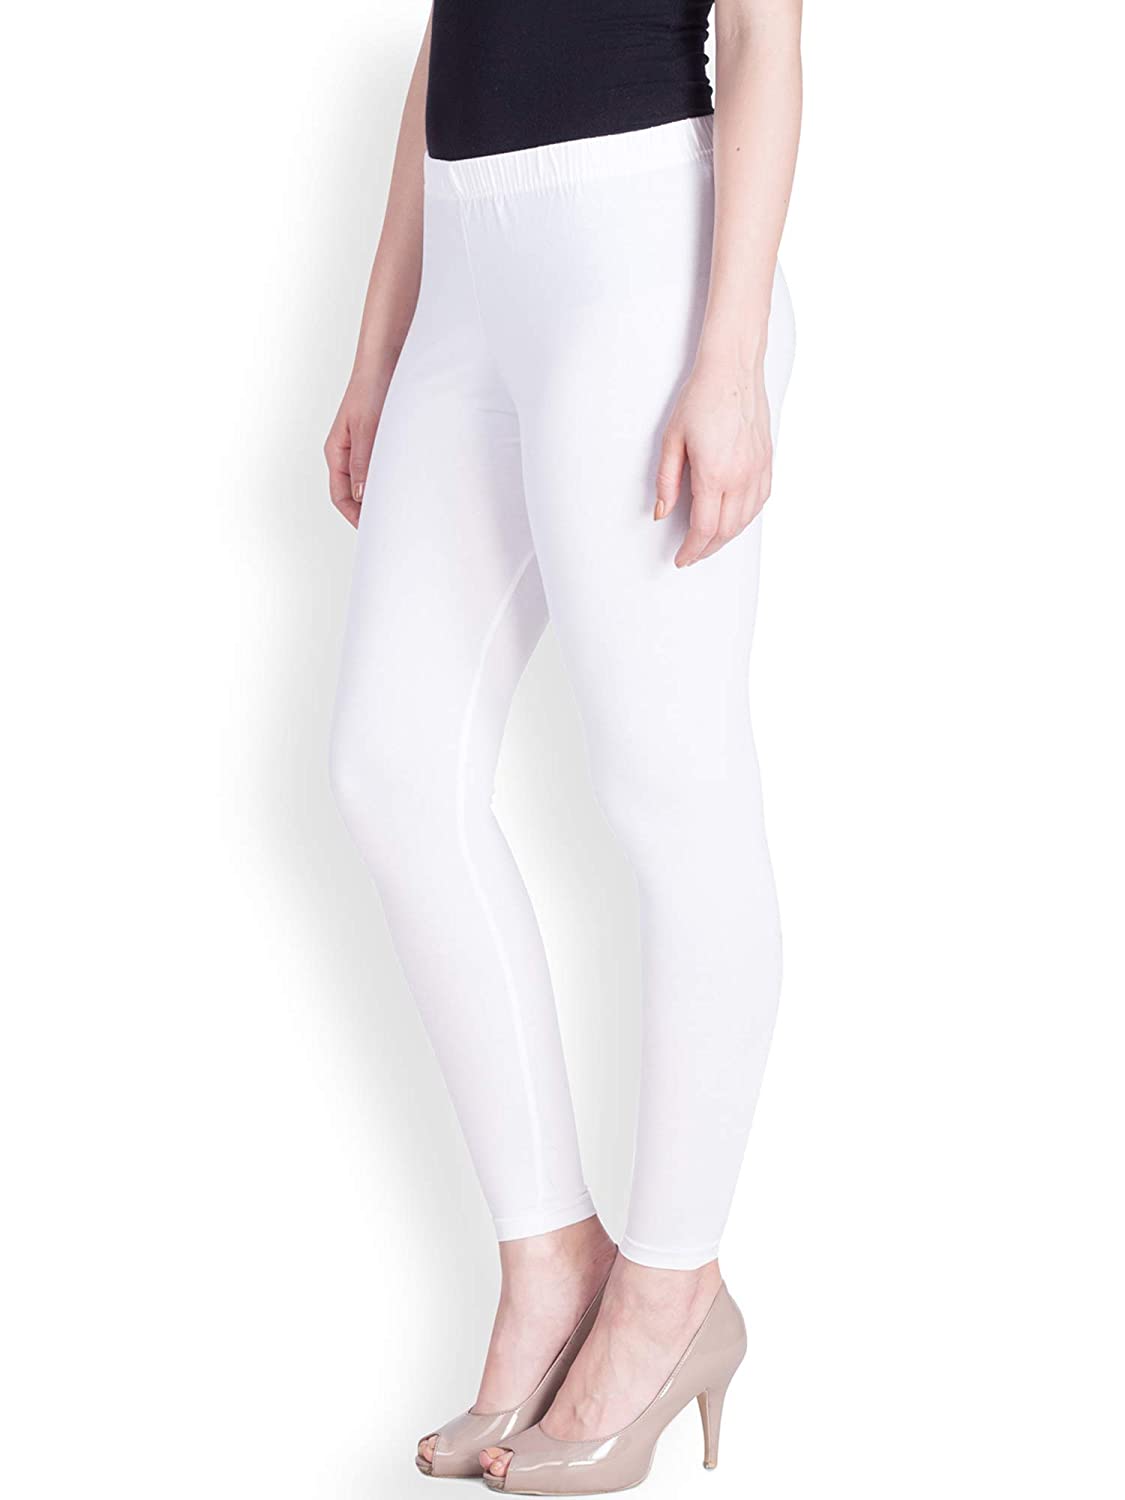 Prisma White Ankle Leggings for a Sleek and Stylish Look